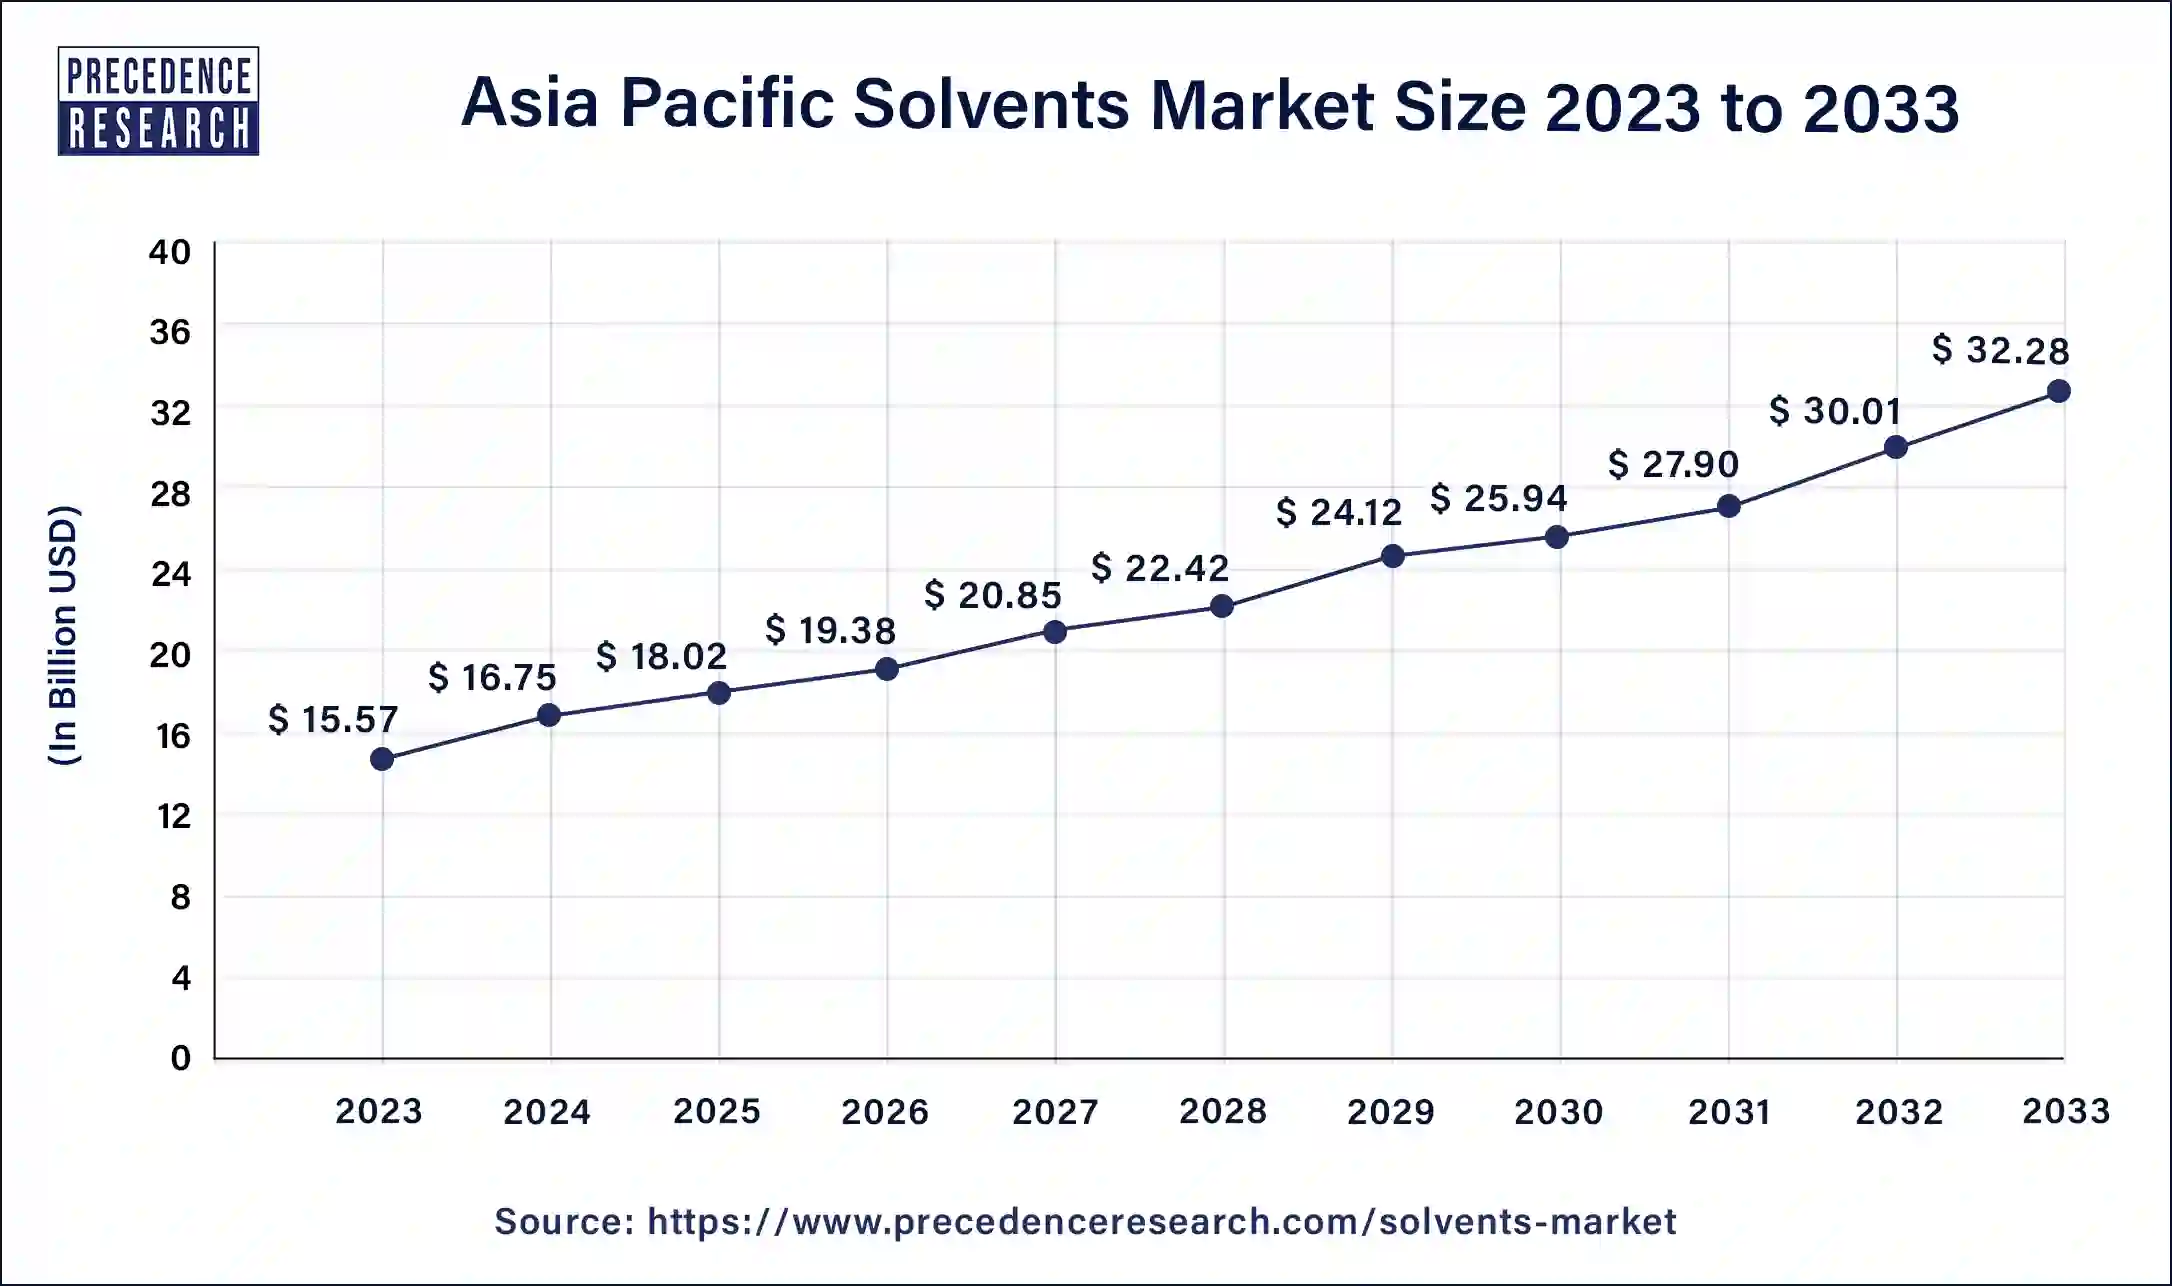 Asia Pacific Solvents Market Size 2024 to 2033